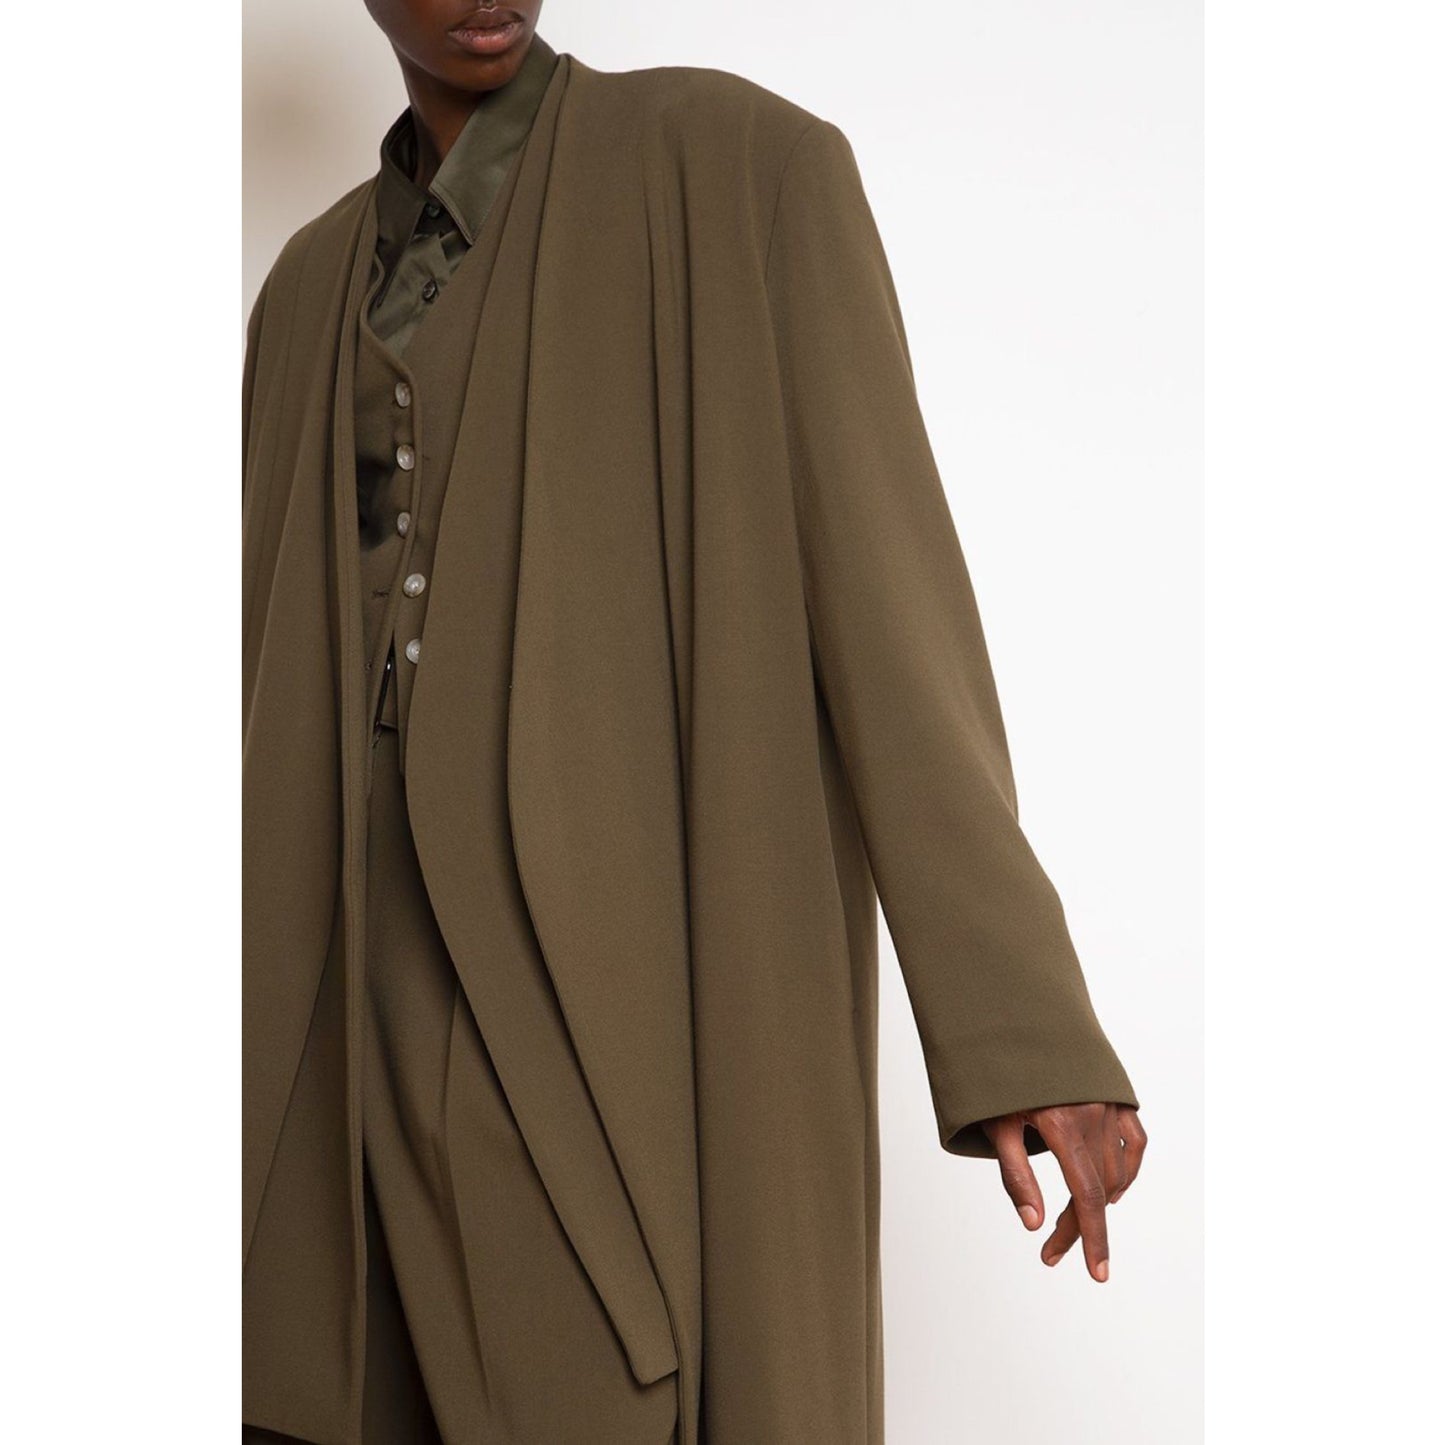 The Frankie Shop Overcoat